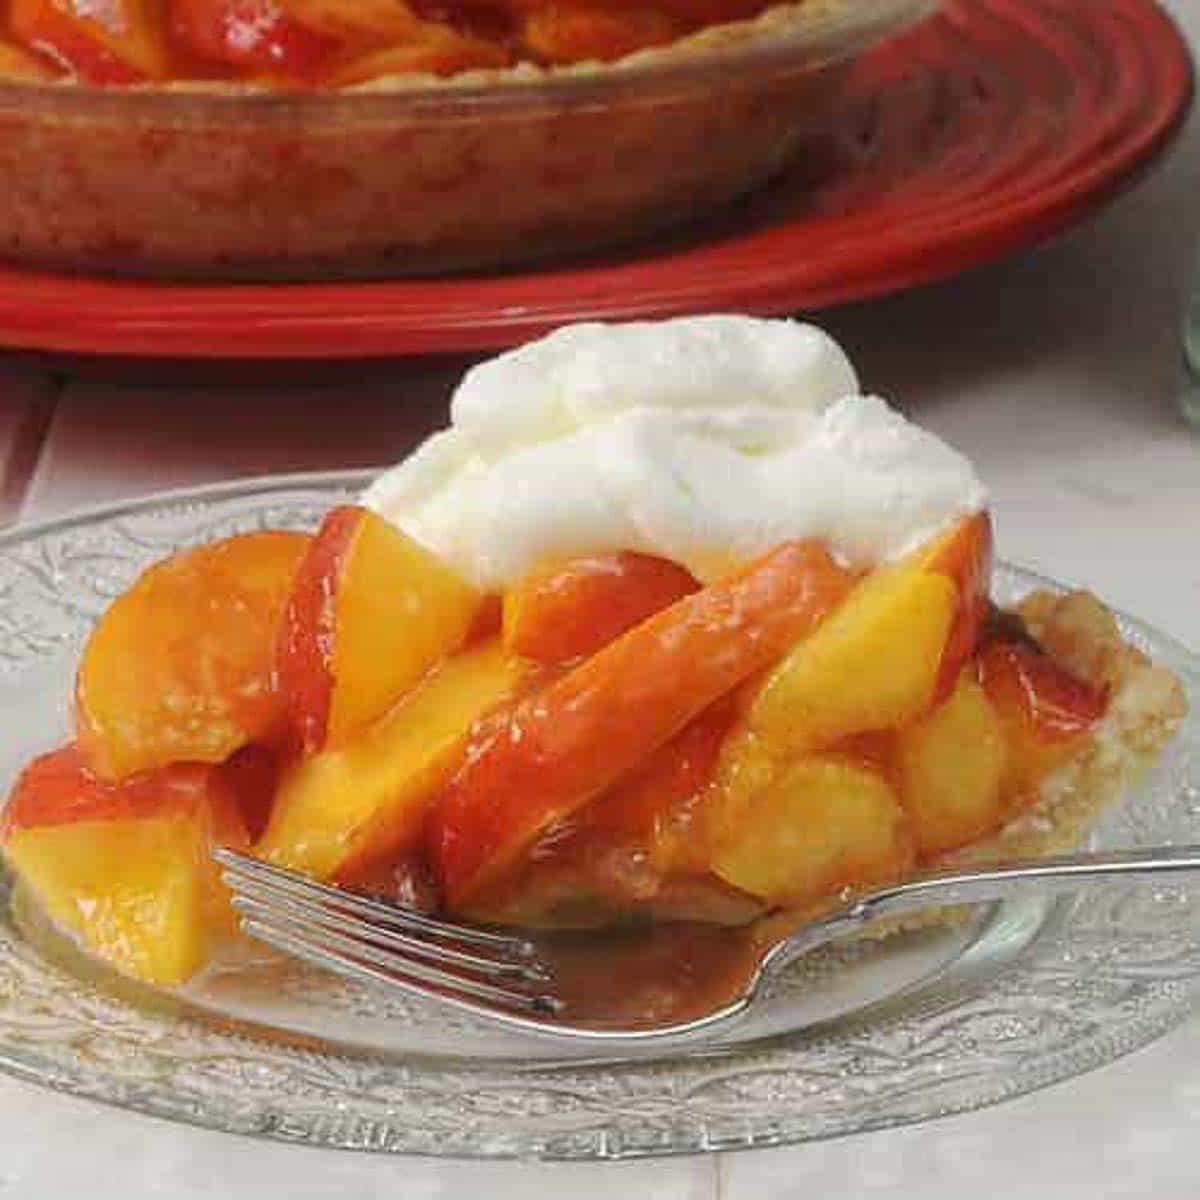 slice of nectarine pie with whipped cream on the side.